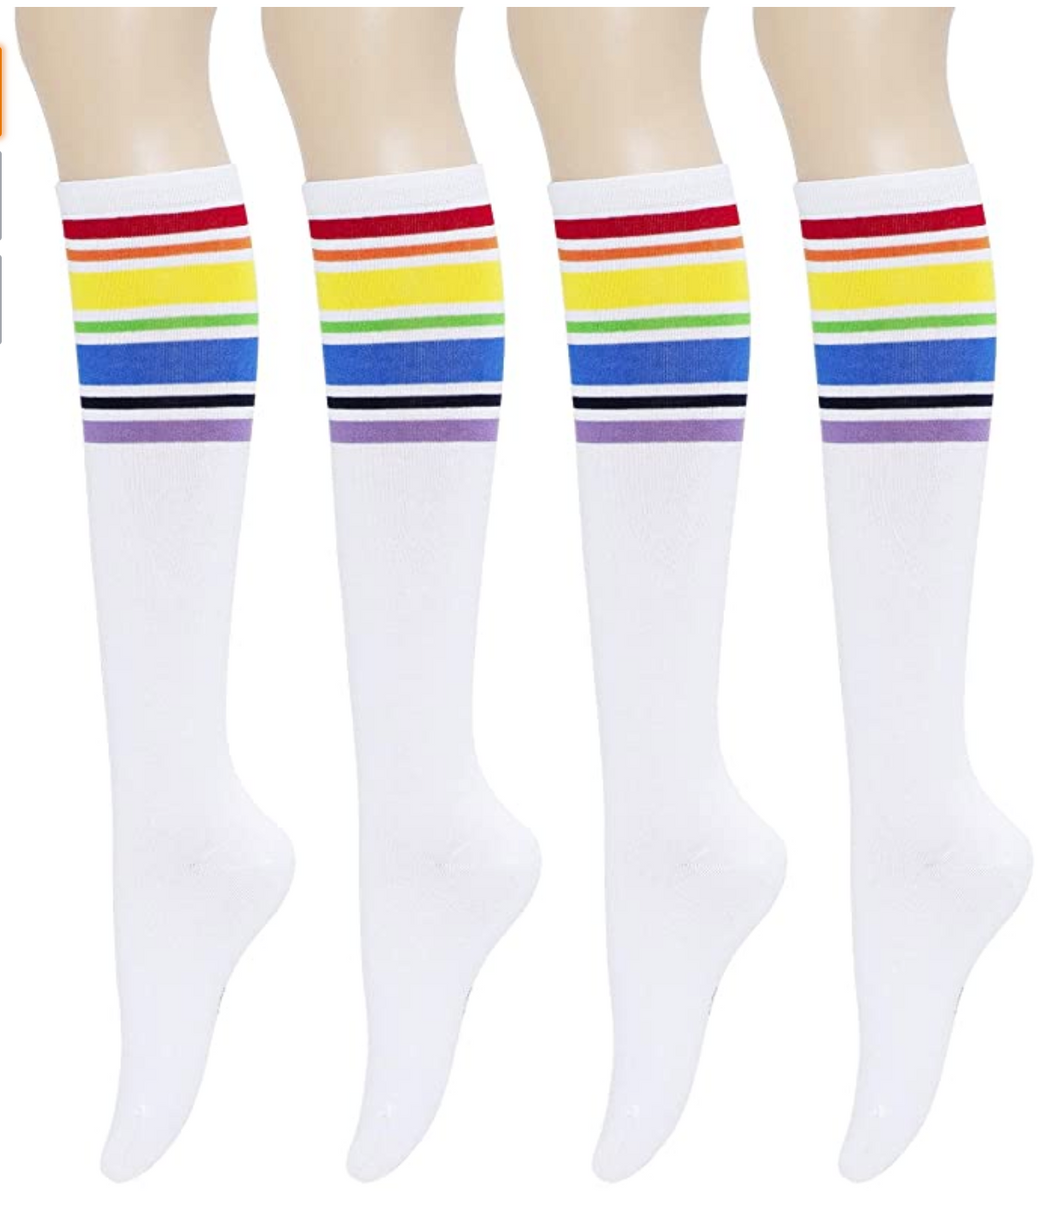 YEJIMONG Women's Striped Knee High Socks with Non-Slip Ribbed Cuffs - White (Rainbow Stripes) (4 Pairs / Size 6-10 / Combed Cotton)